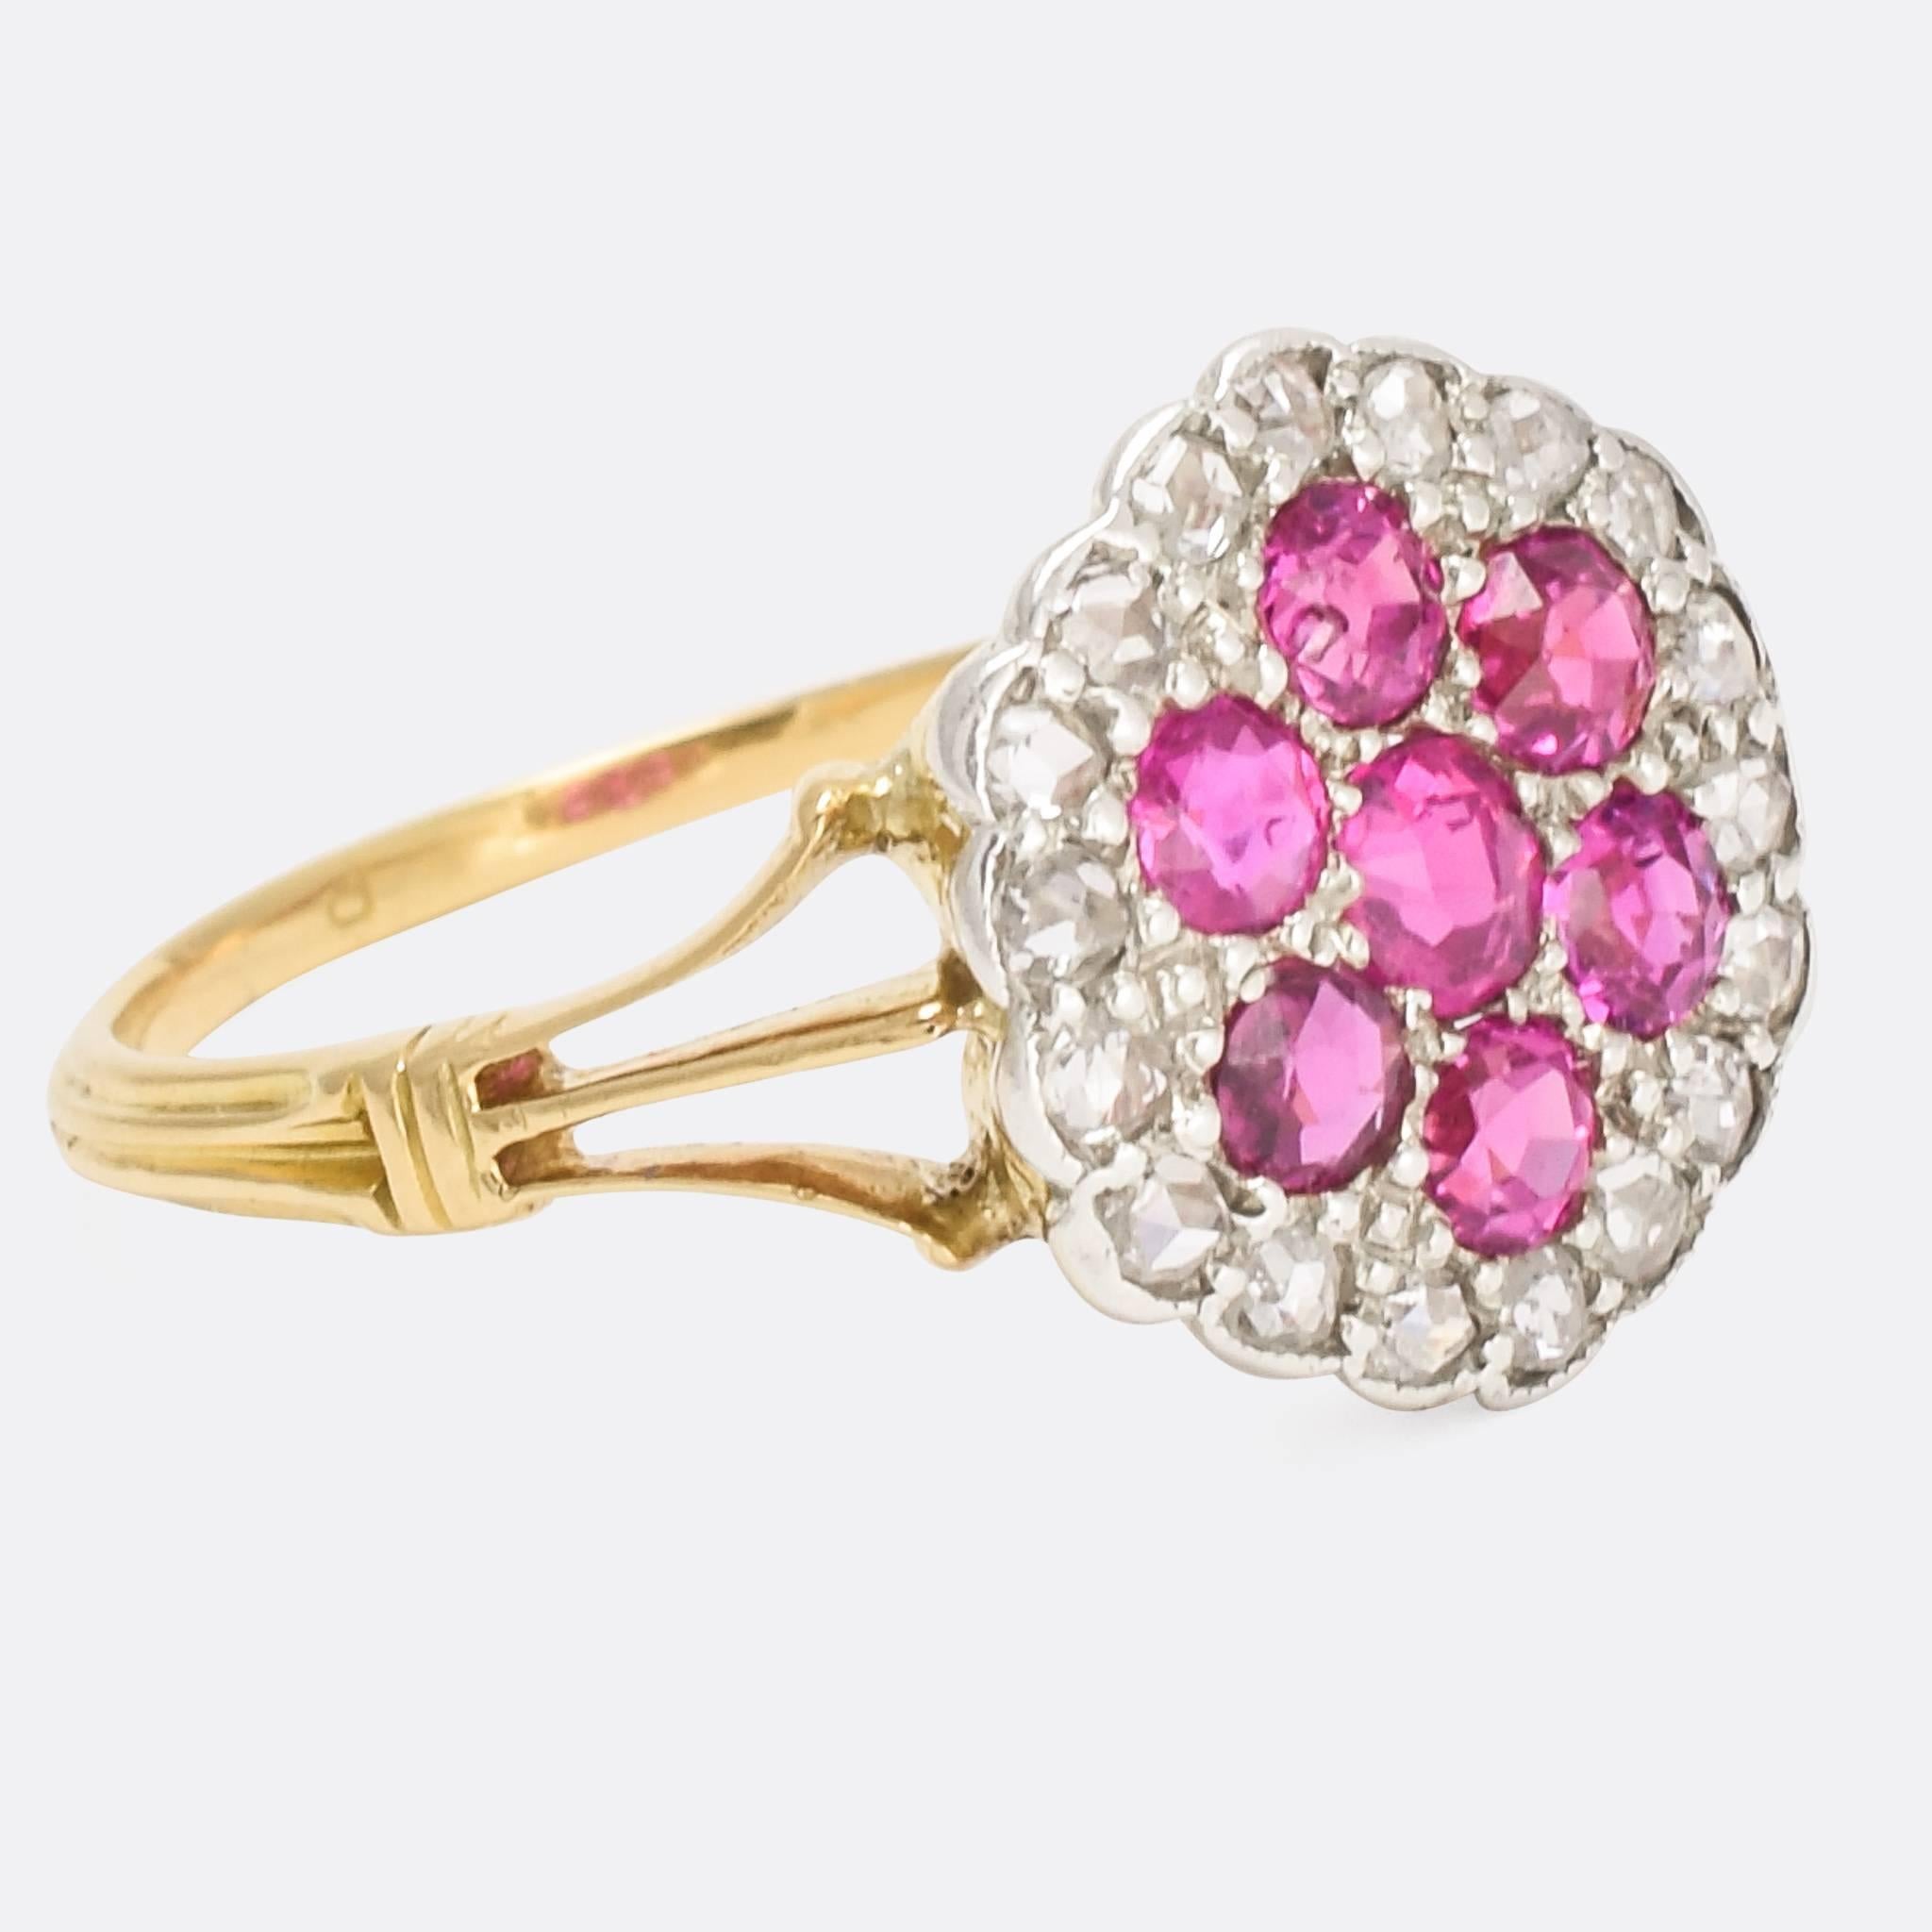 A sublime antique pavé cluster ring, the platinum head modelled as a stylised flower. It's set with seven bright rubies, within a cluster of 18 rose cut diamonds. With pretty trifurcated split shoulders and a grooved band, it's a very beautiful